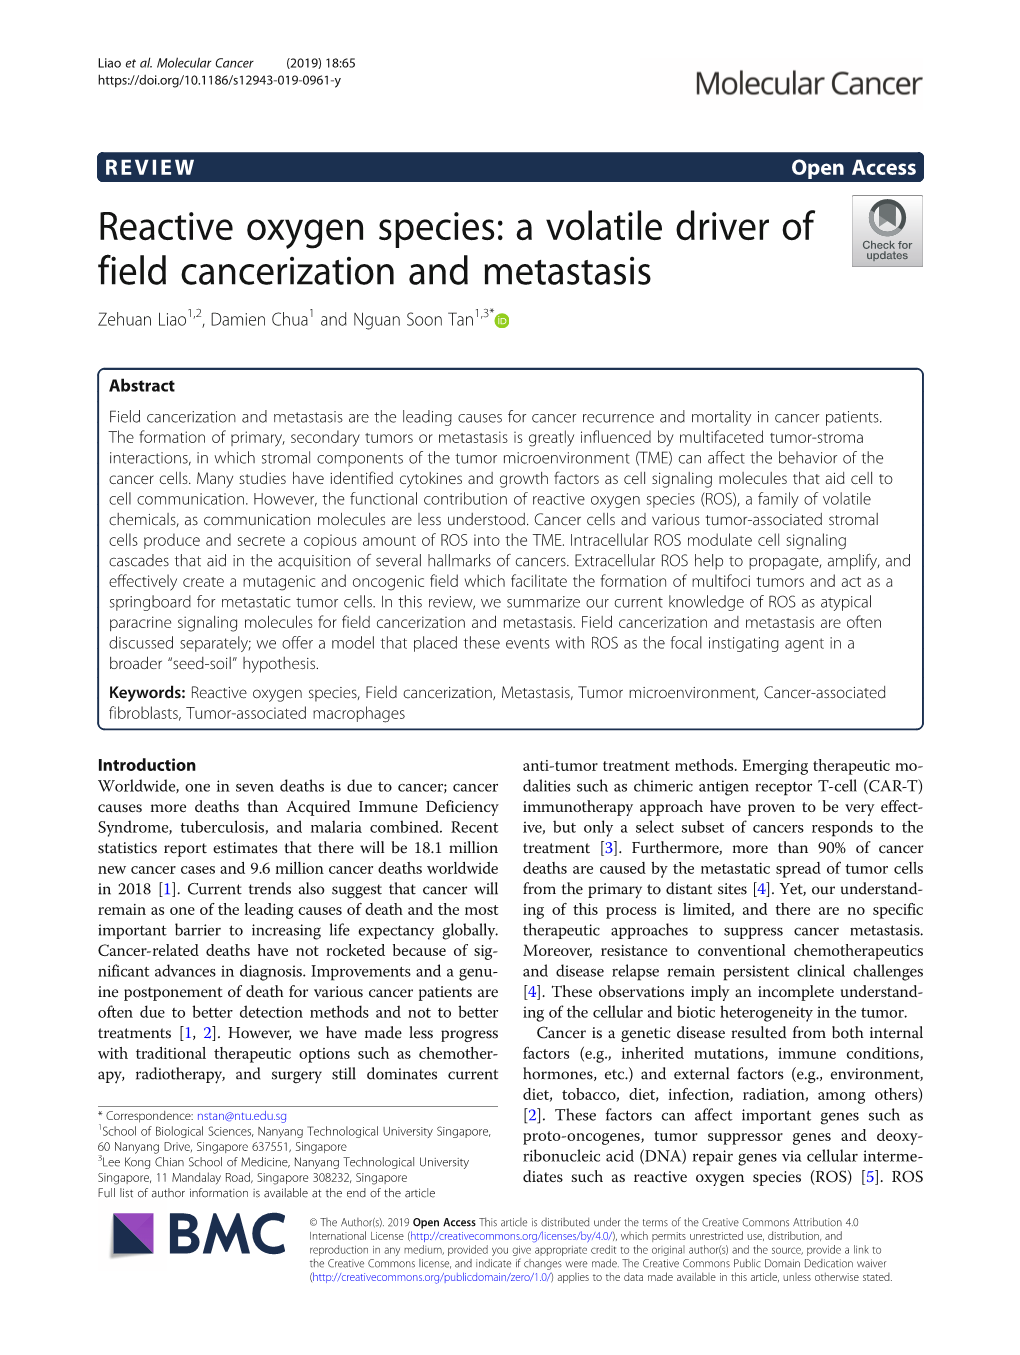 Reactive Oxygen Species: a Volatile Driver of Field Cancerization and Metastasis Zehuan Liao1,2, Damien Chua1 and Nguan Soon Tan1,3*